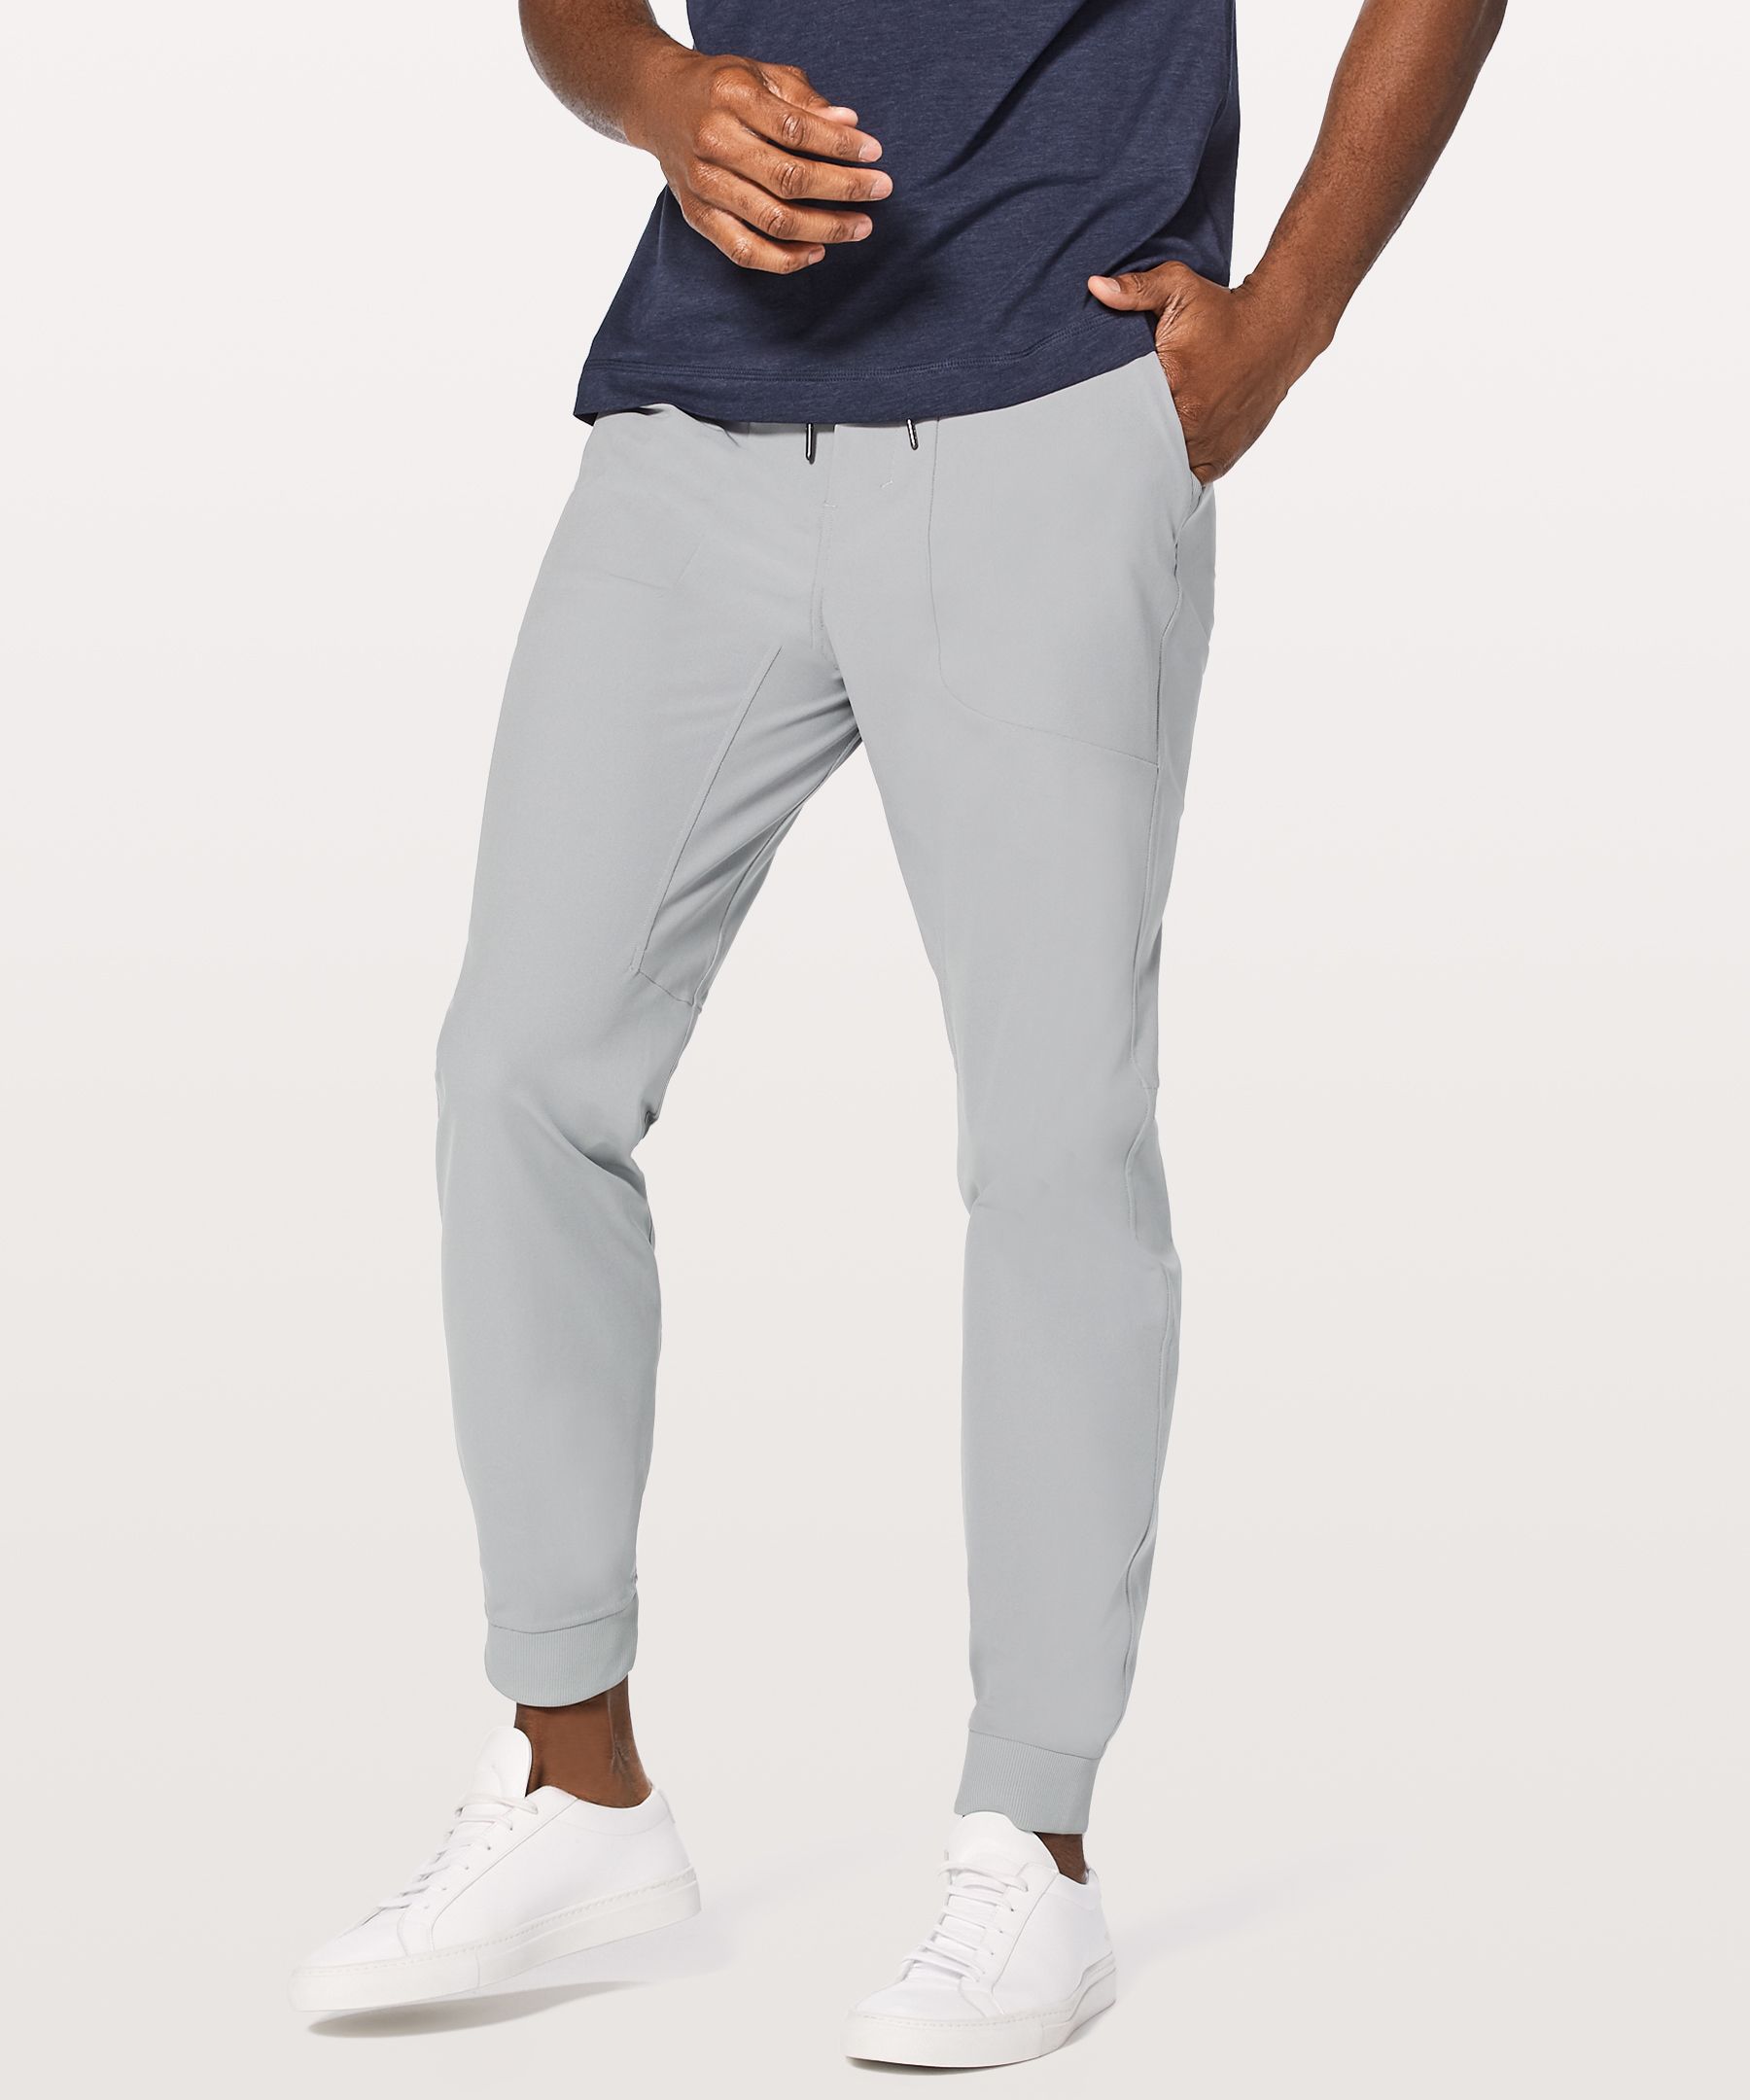 lululemon - The wait is over—ABC Joggers are back